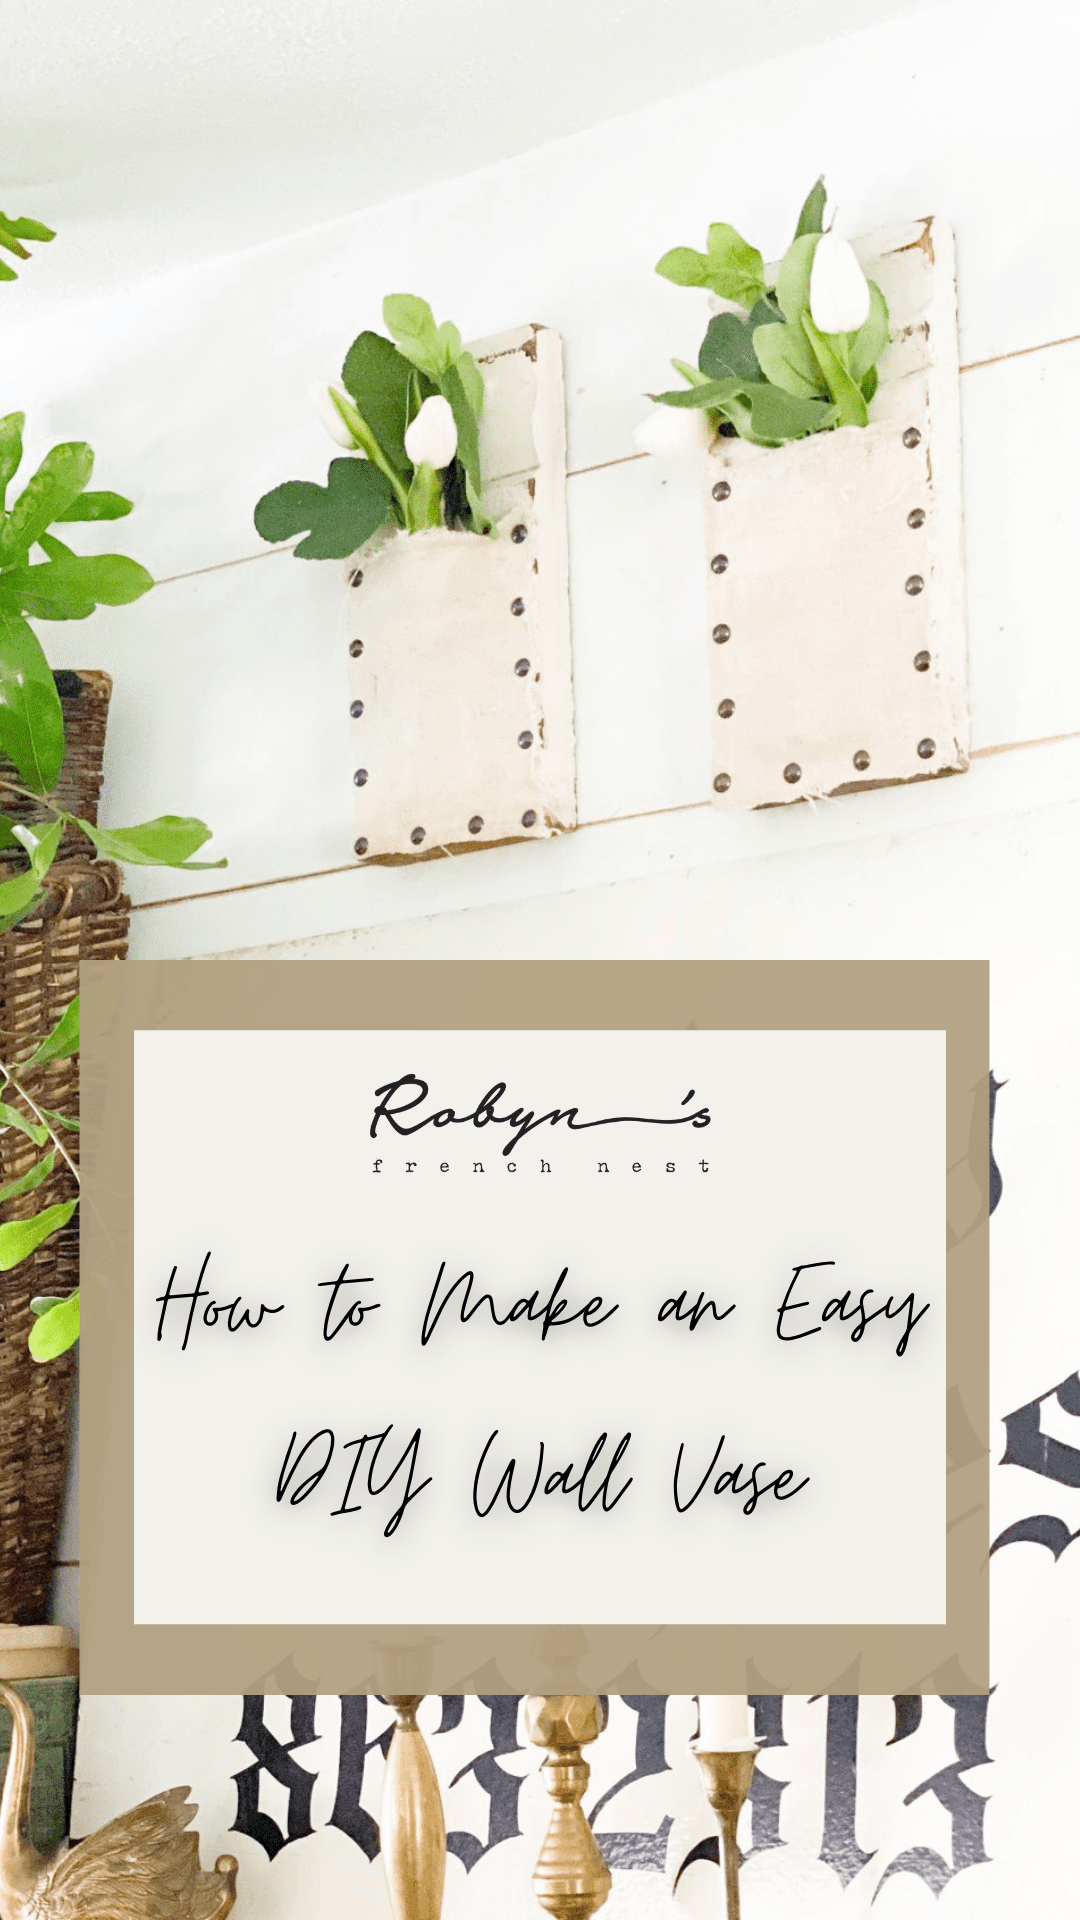 How to Make an Easy Architectural Salvage Wall Vase